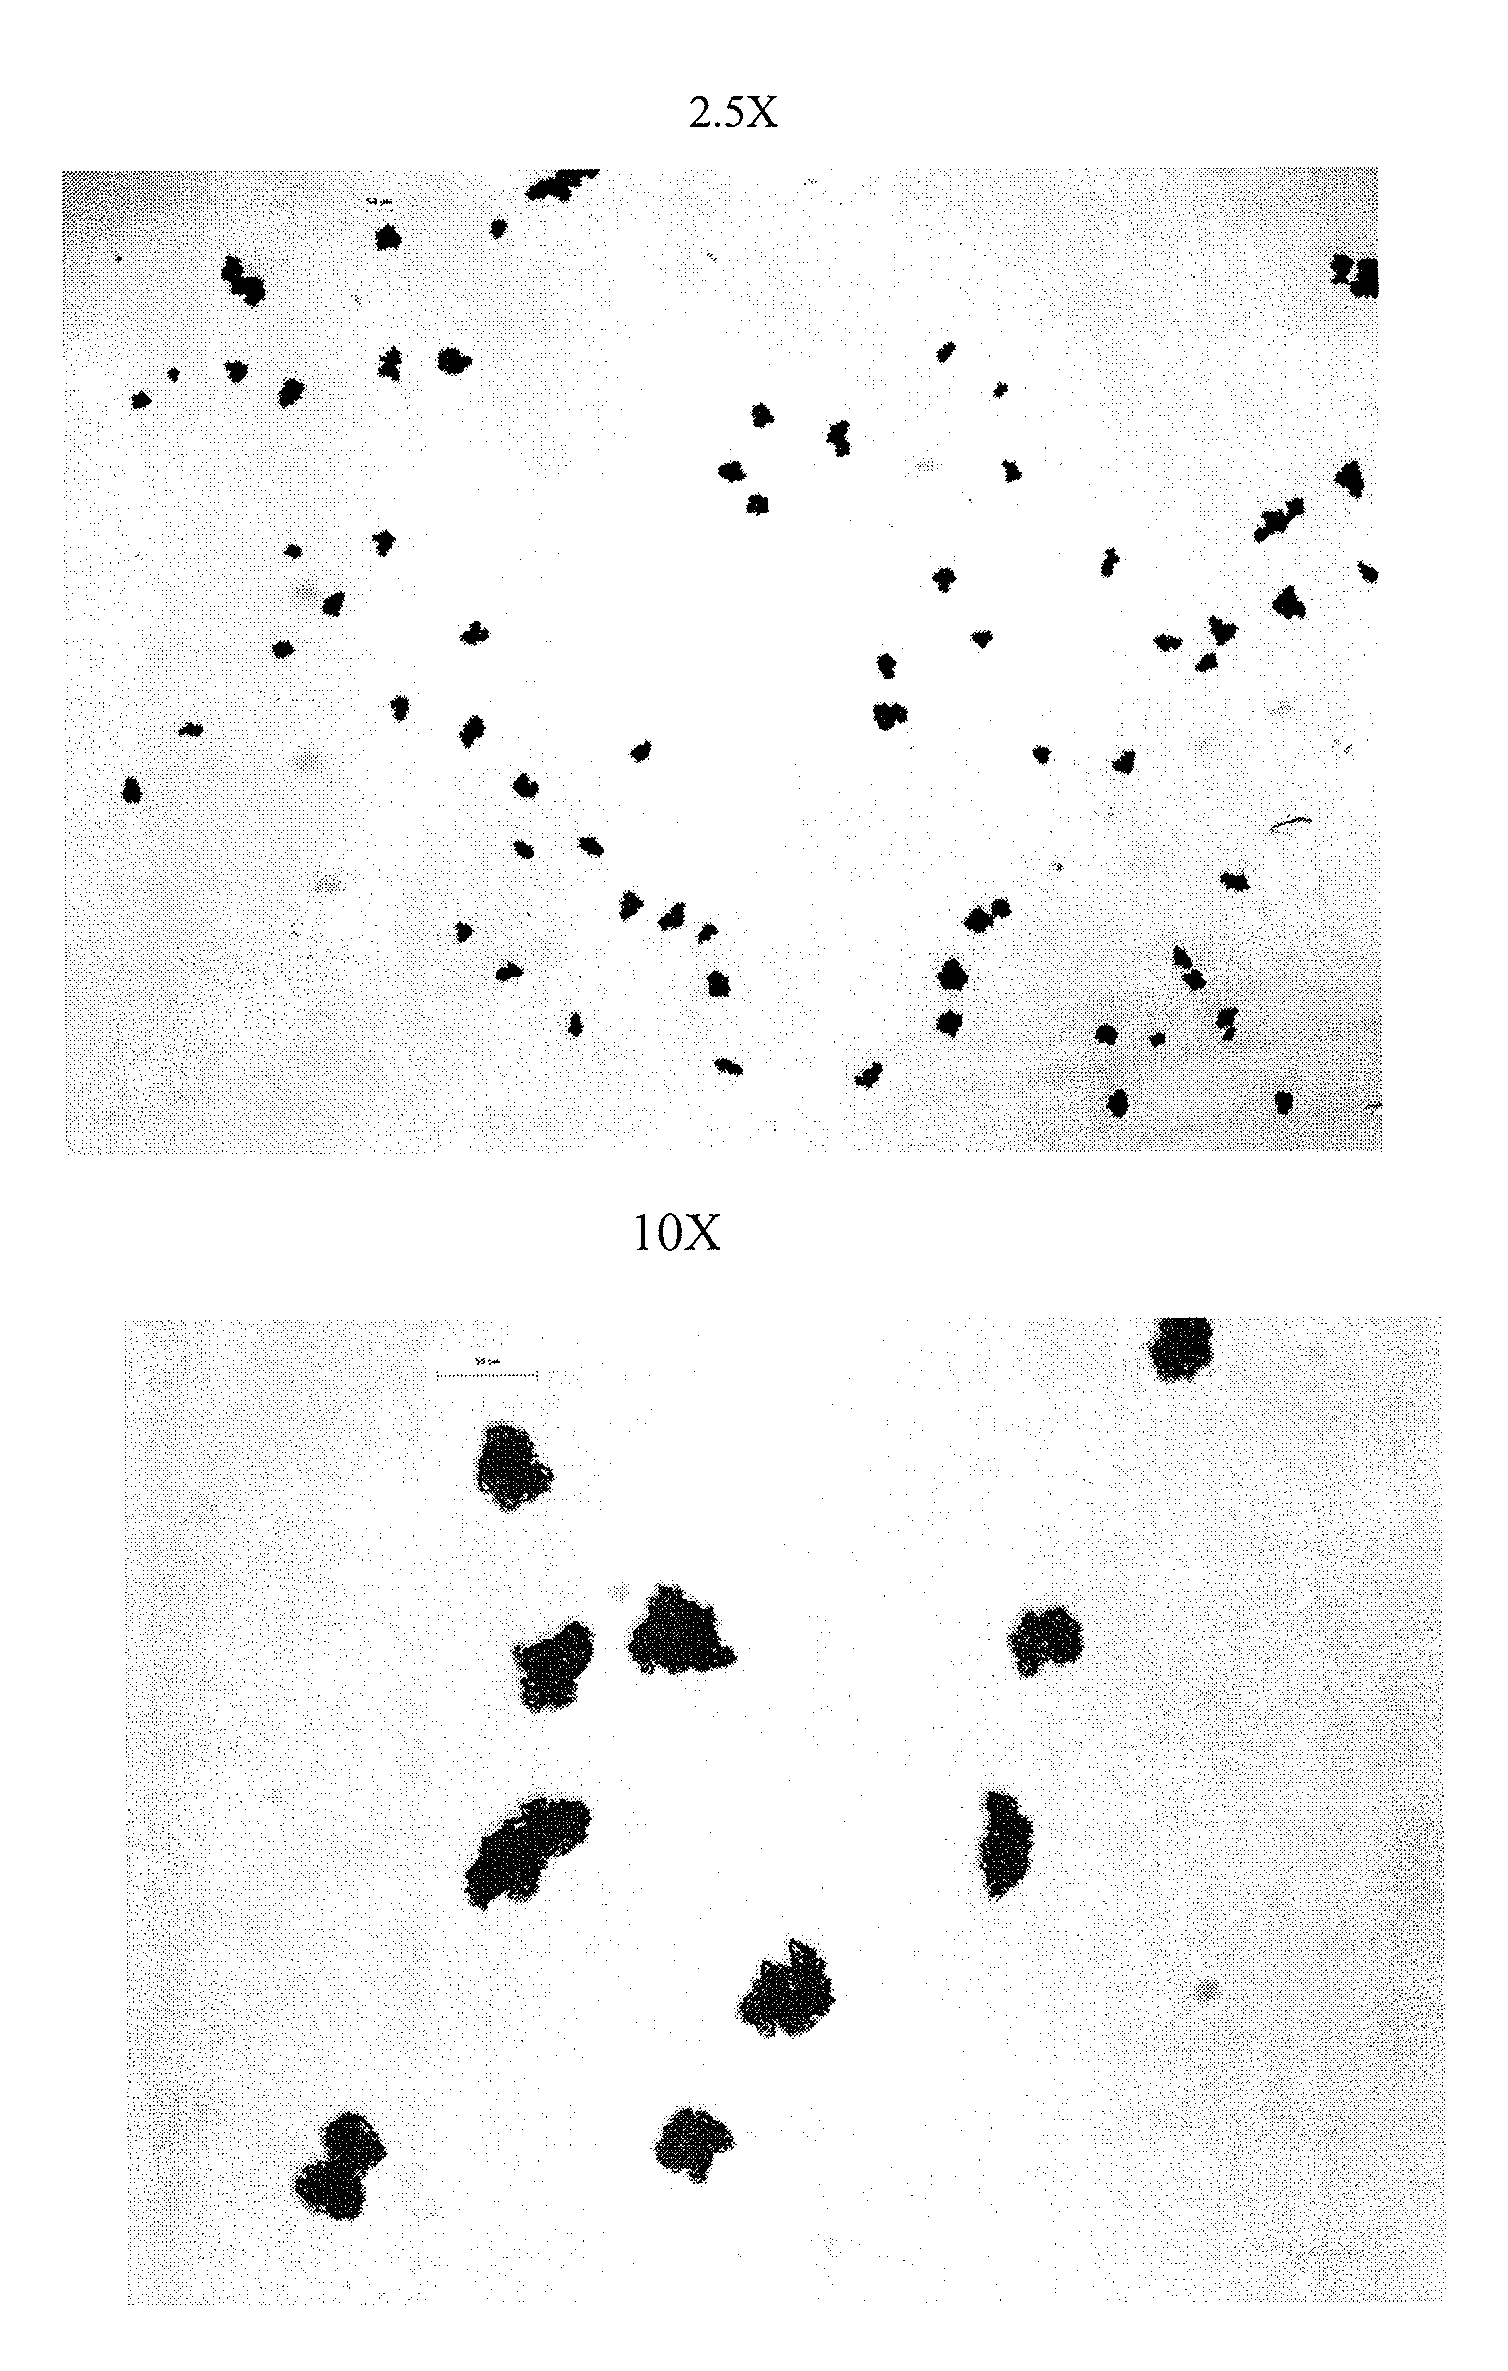 Fexofenadine Microcapsules and Compositions Containing Them